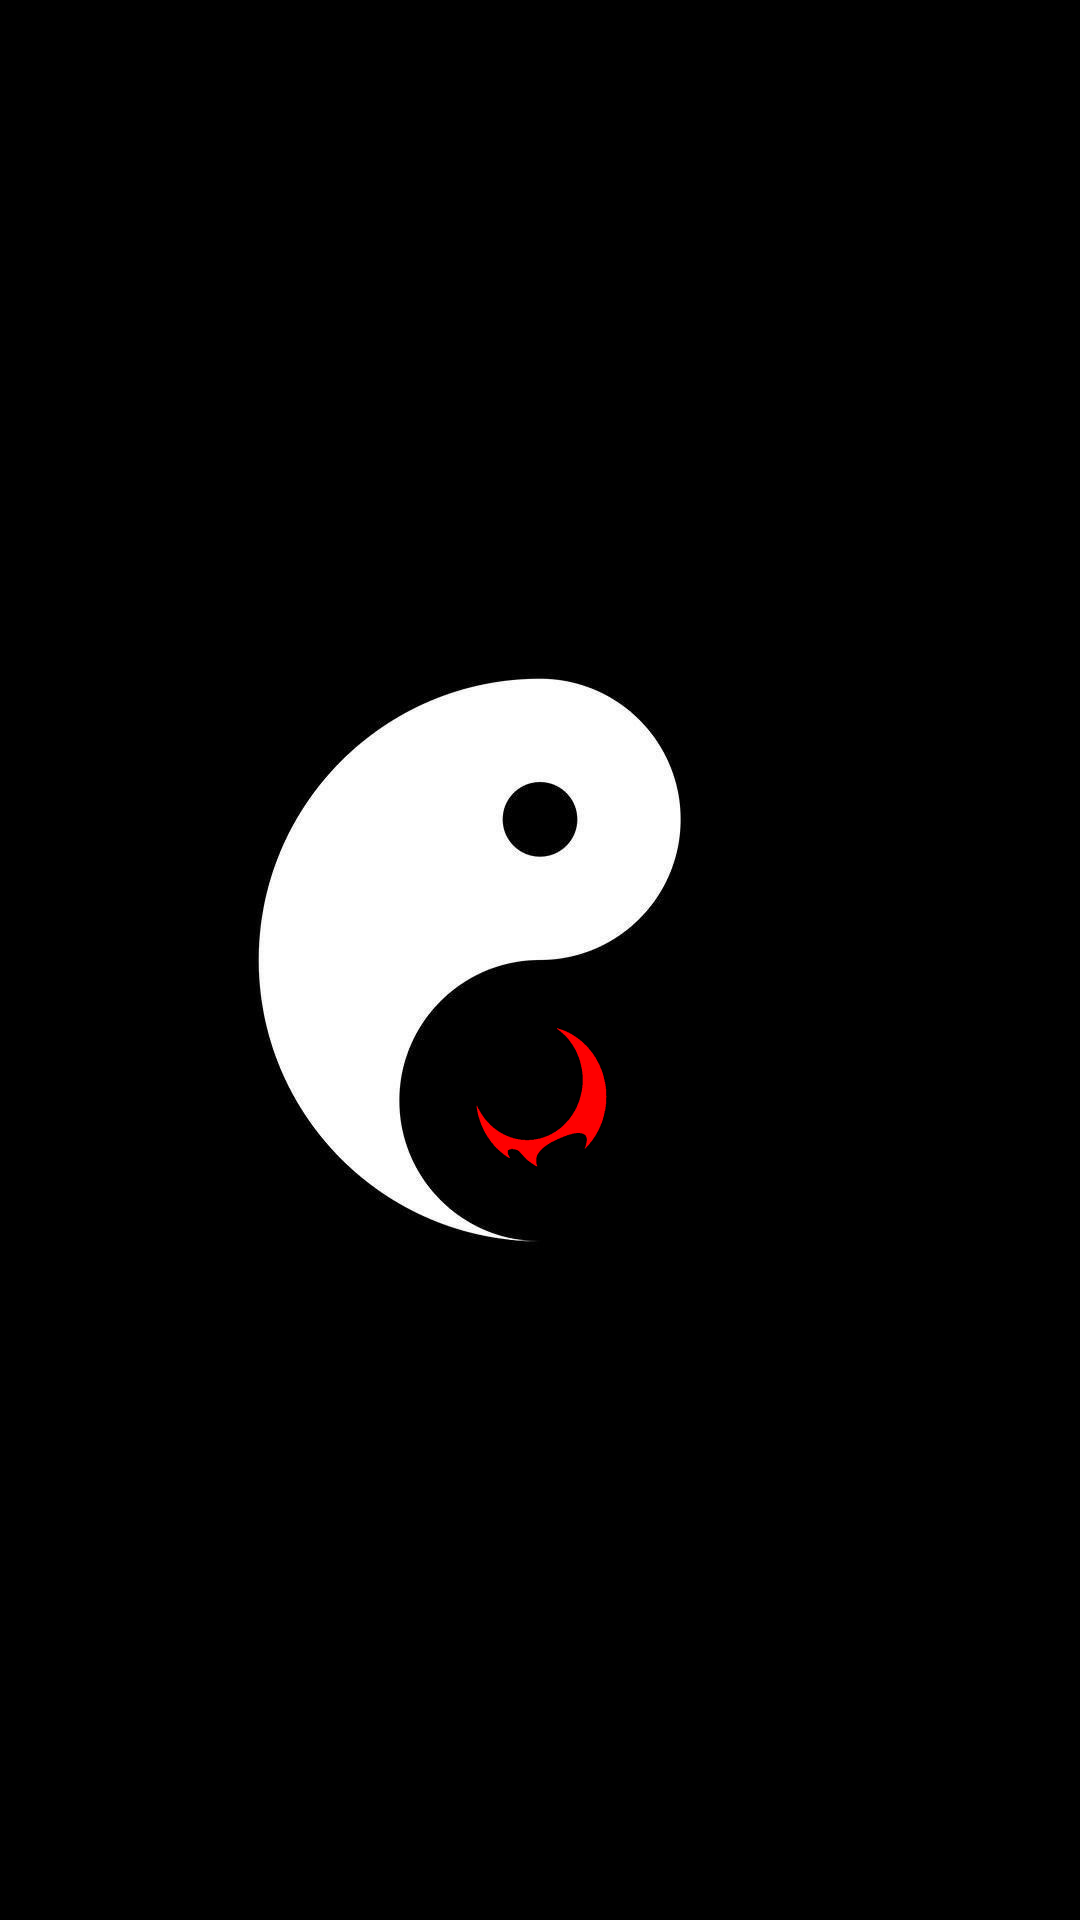 A minimalist yin yang wallpaper I made for my phone. I hope it can